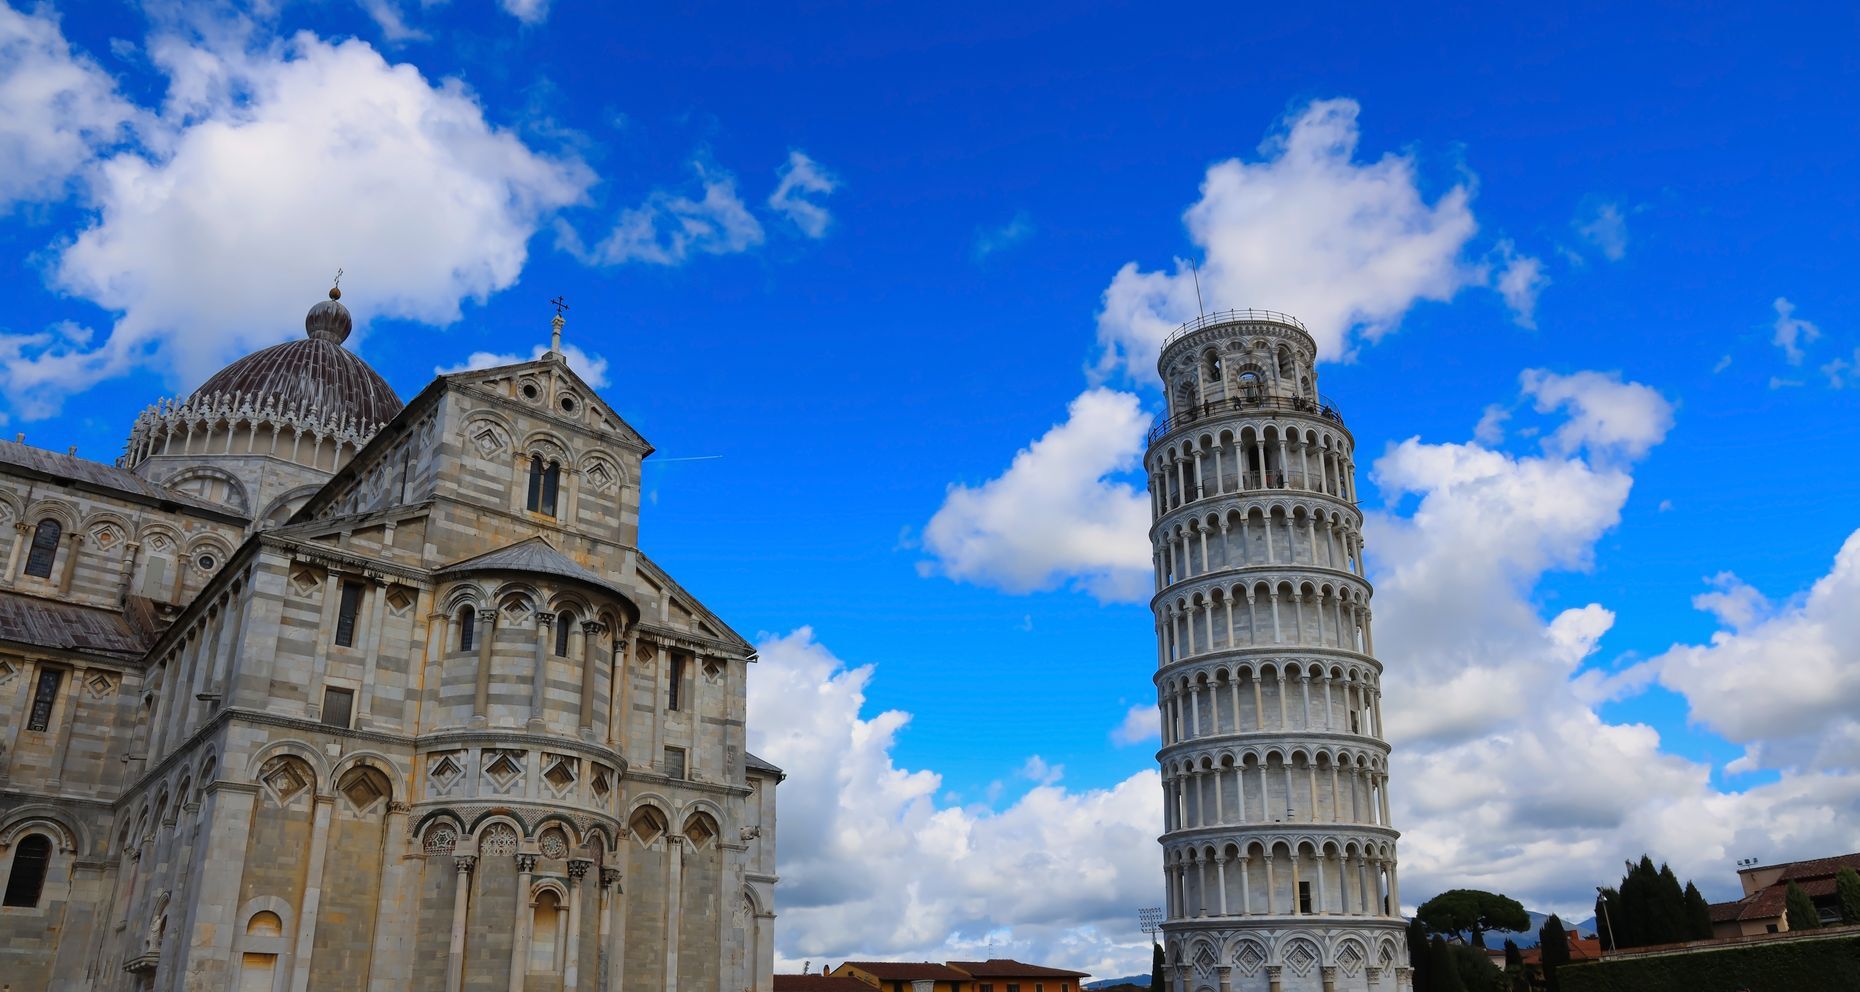 <p>It’s sometimes included on travel bucket lists and many tourists have cheesy photos of themselves in front of it, but the famous Leaning Tower of Pisa is one of the worst places to travel to in 2024. Enthusiastic trippers will most likely be <a href="https://manhattanite.co/pisa-italy/">disappointed</a> in the tower and the cathedral in Pisa, Italy. The long lines, expensive tickets, and rather underwhelming leaning of the structure is sure to put people off. Instead, check out <a href="https://en.wikipedia.org/wiki/San_Gimignano">San Gimignano</a> in Tuscany to see beautiful medieval towers and stay away from the tourist onslaught. </p>